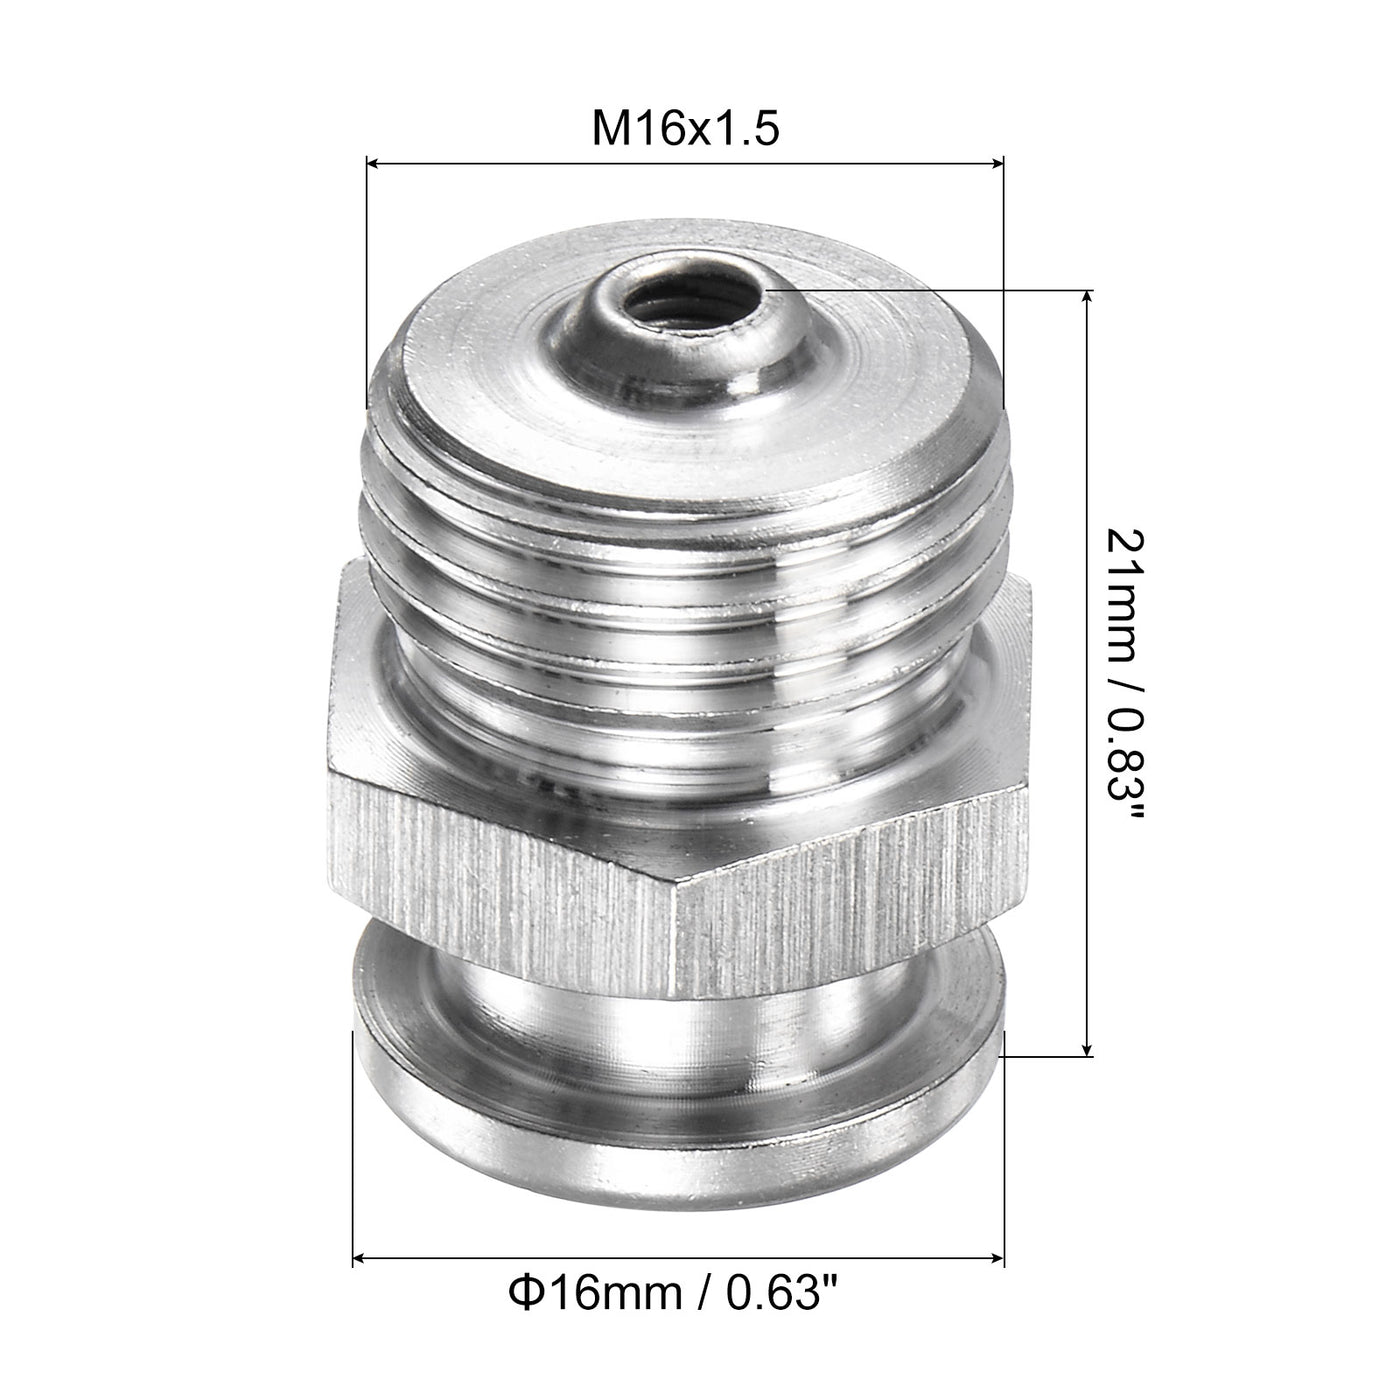 Uxcell Uxcell Push Button Grease Oil Cup M10x1 Male Thread 304 Stainless Steel Ball Oiler